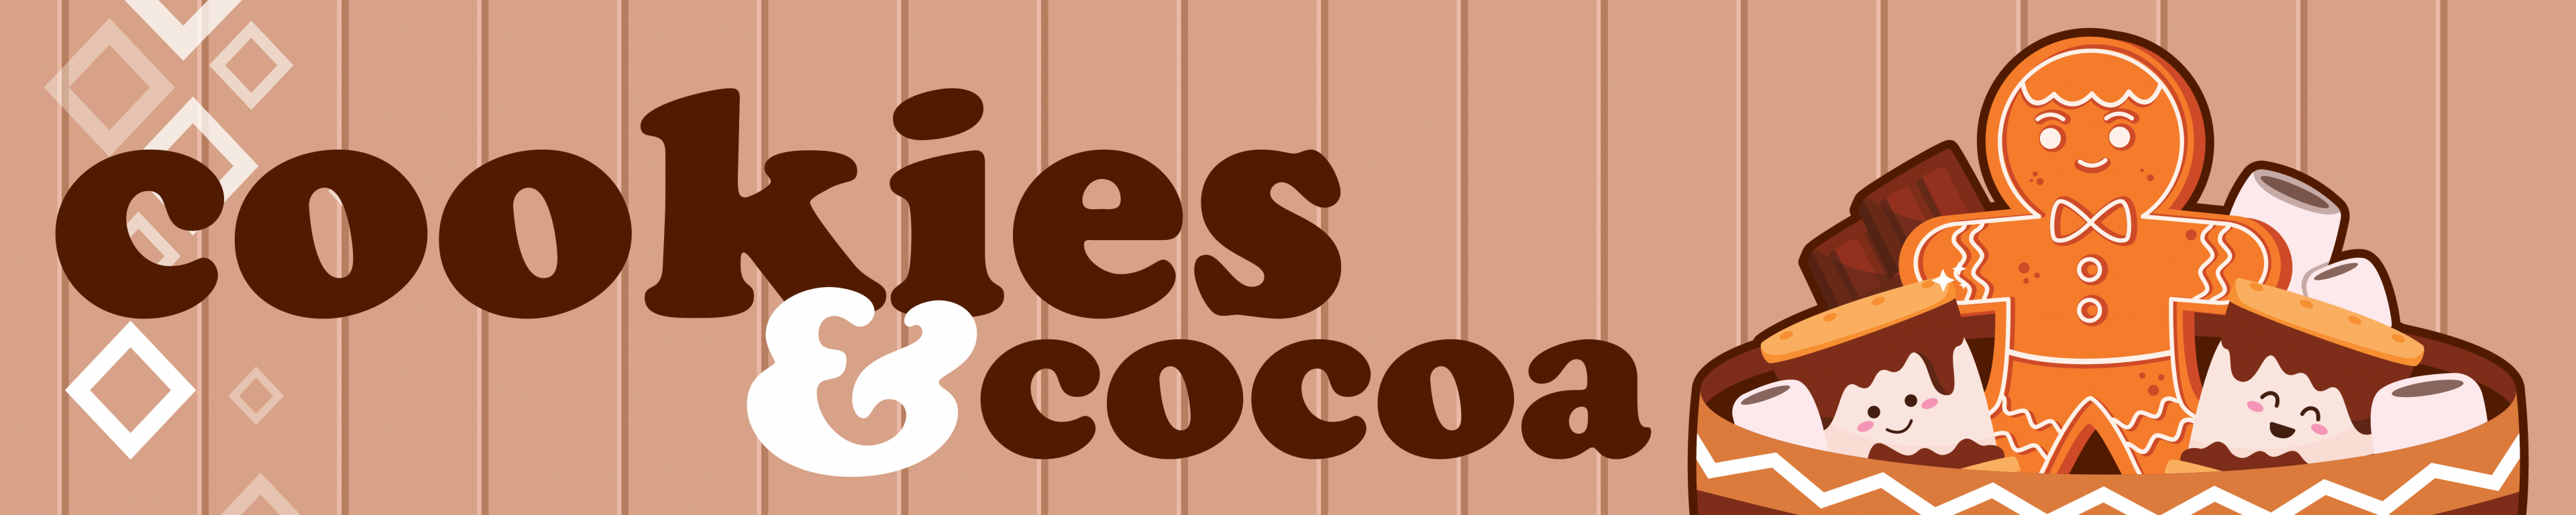 Cookies and cocoa graphic